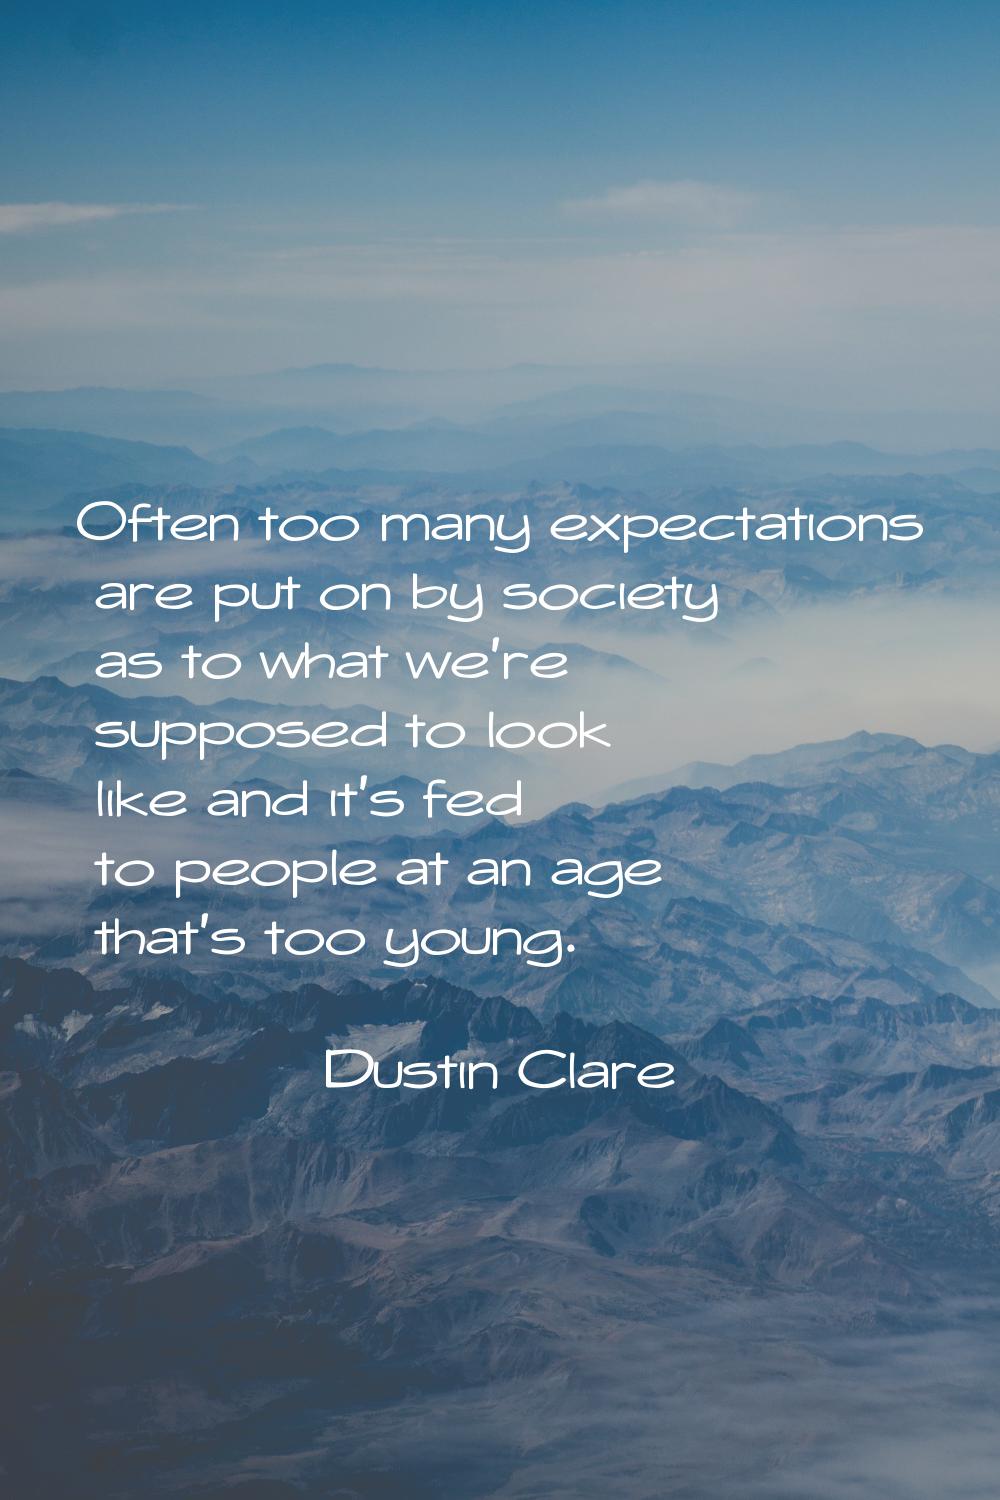 Often too many expectations are put on by society as to what we're supposed to look like and it's f